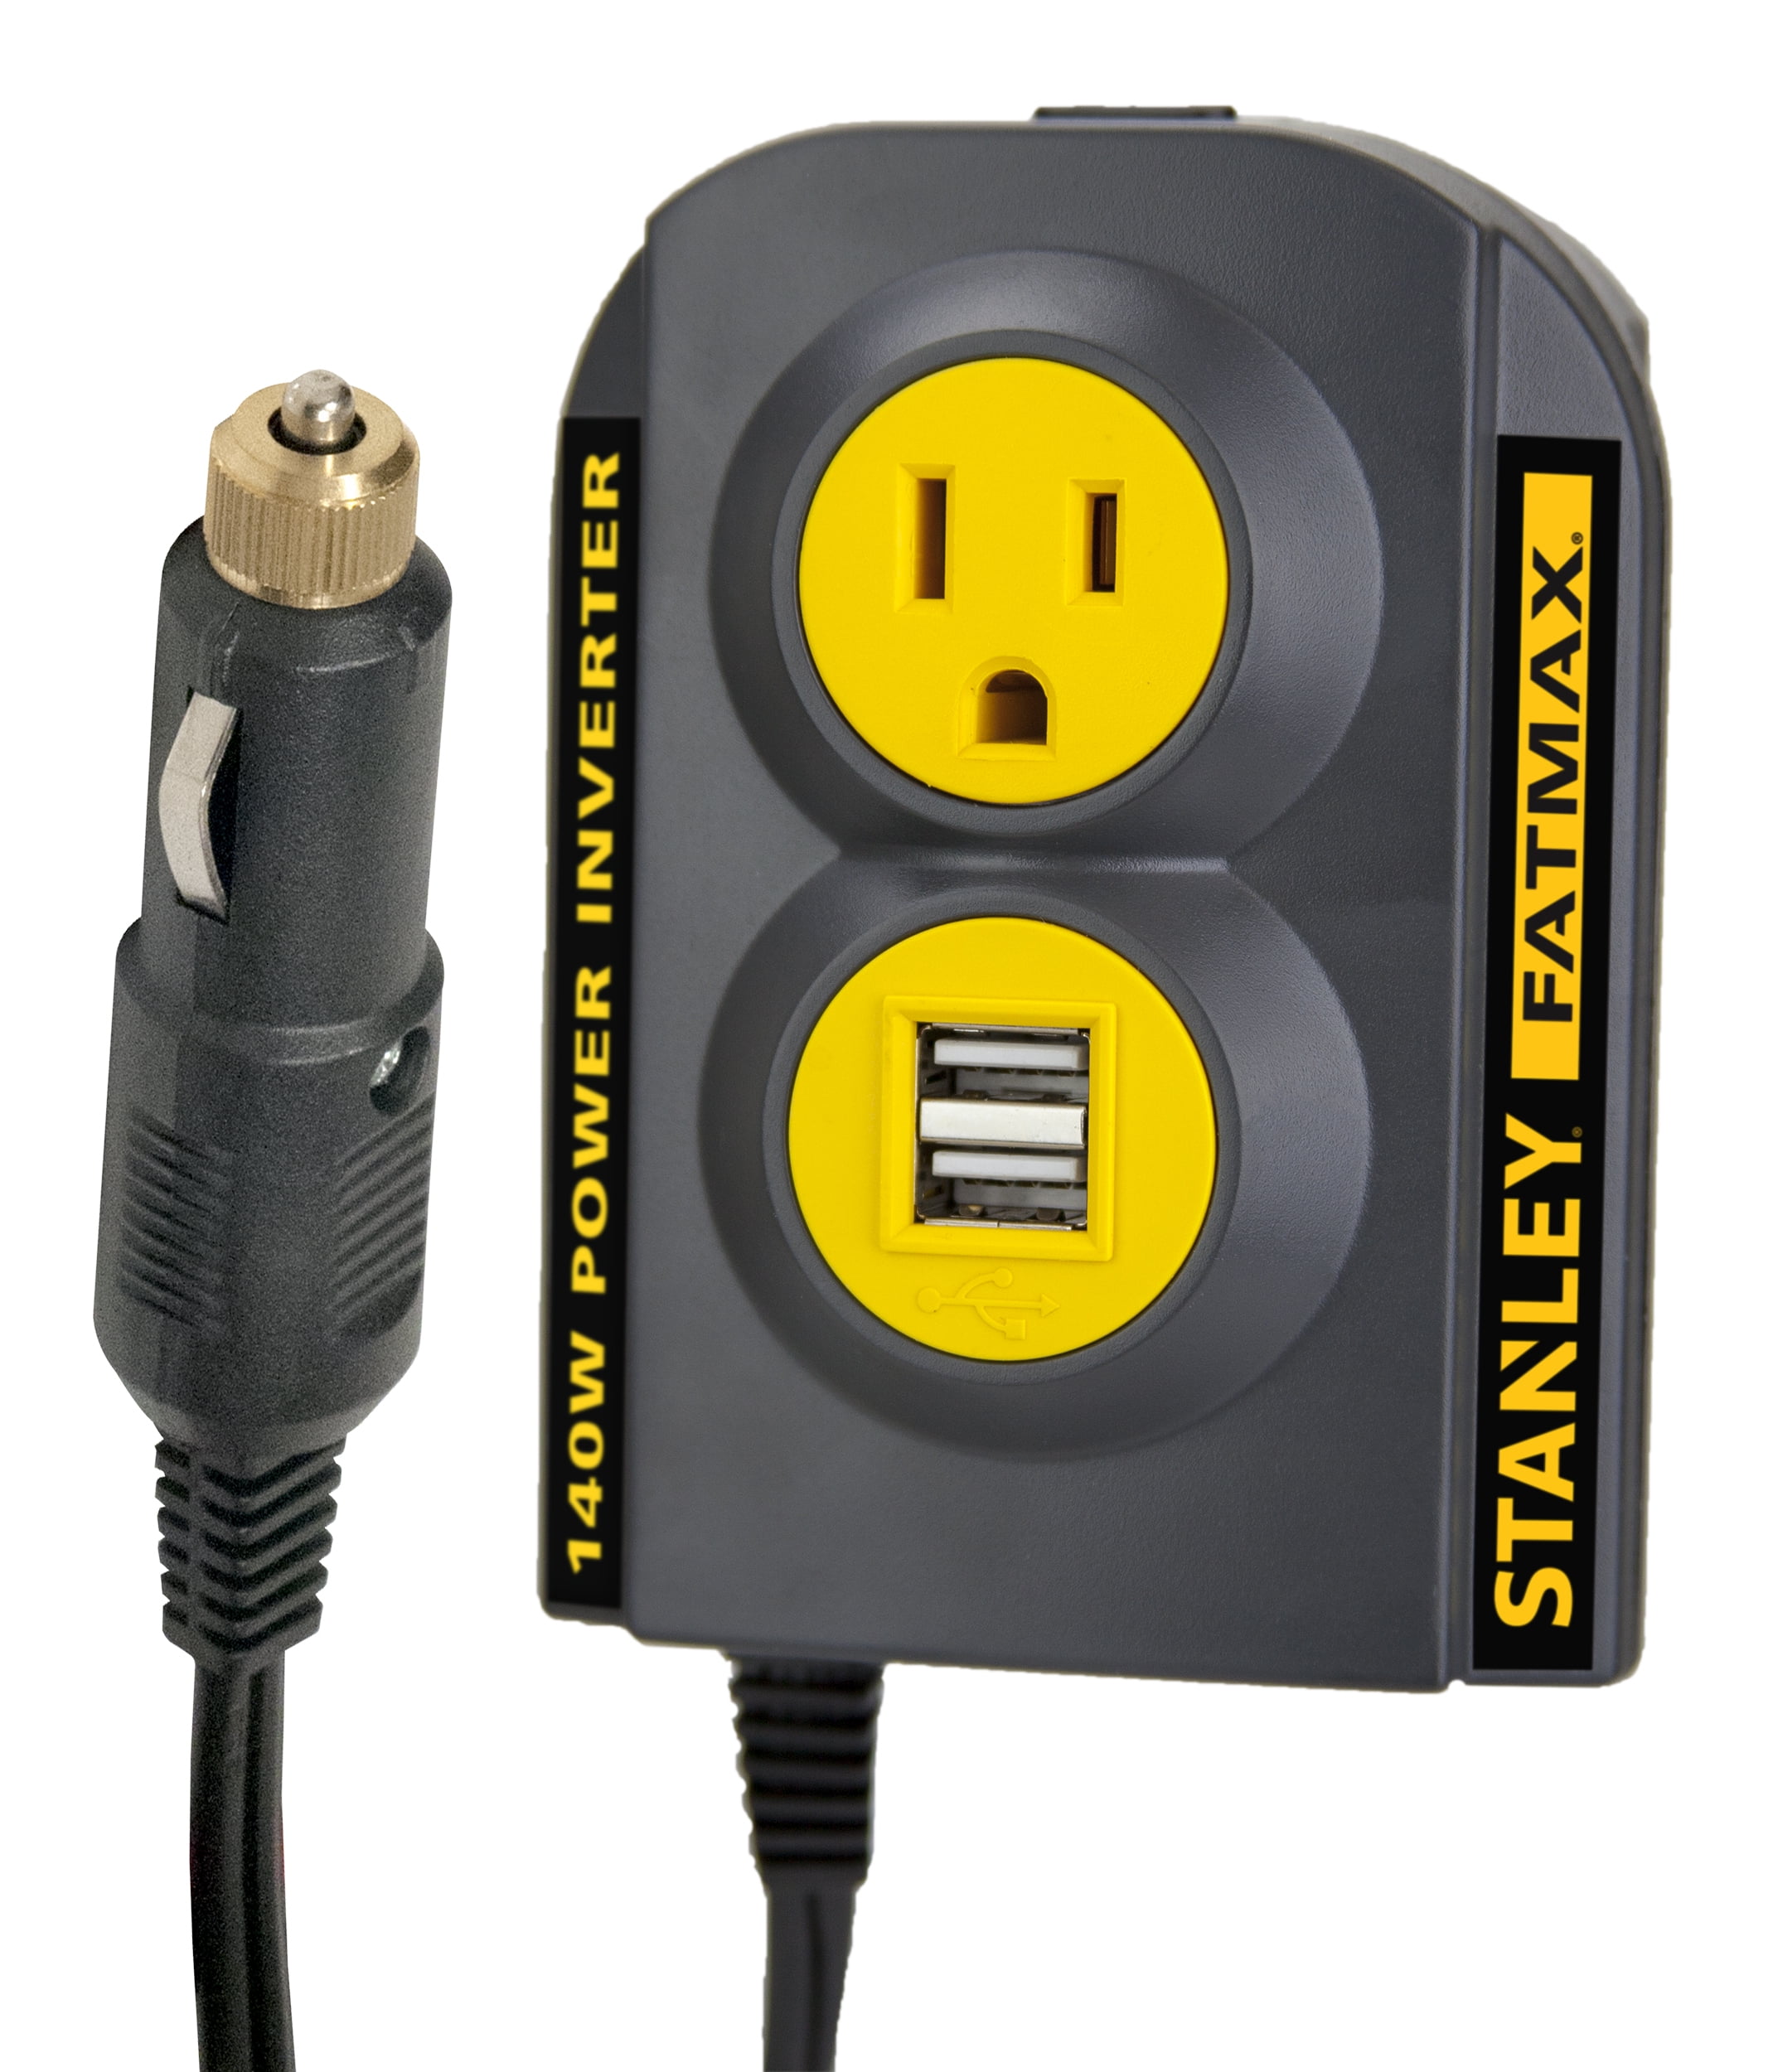 Stanley Wireless Remote Outlet Set Review 